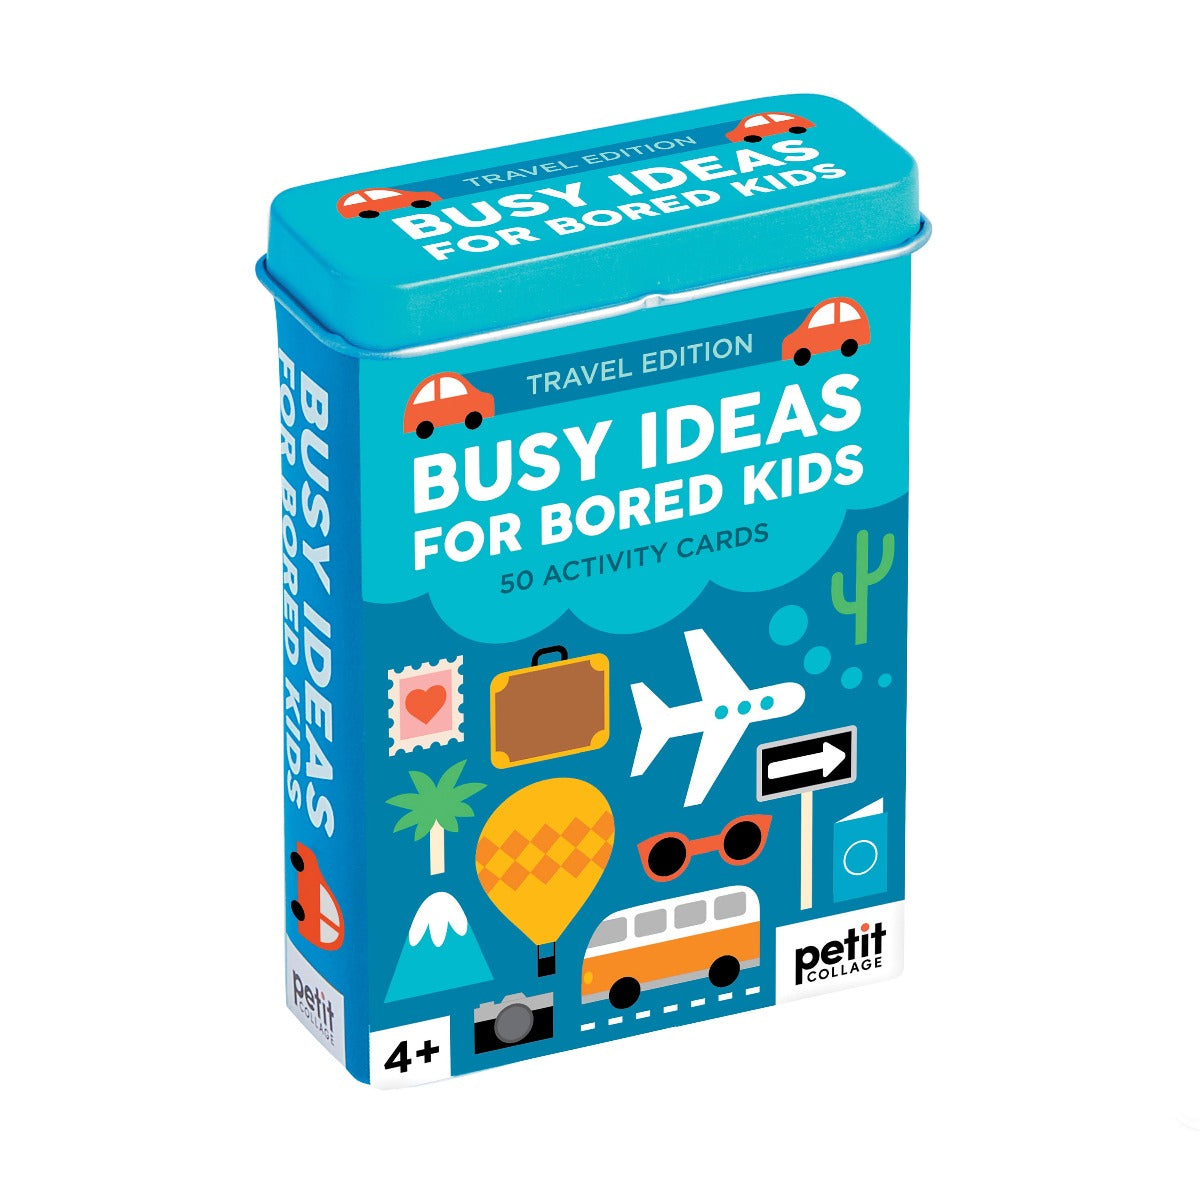 Busy Ideas For Bored Kids - Travel Edition